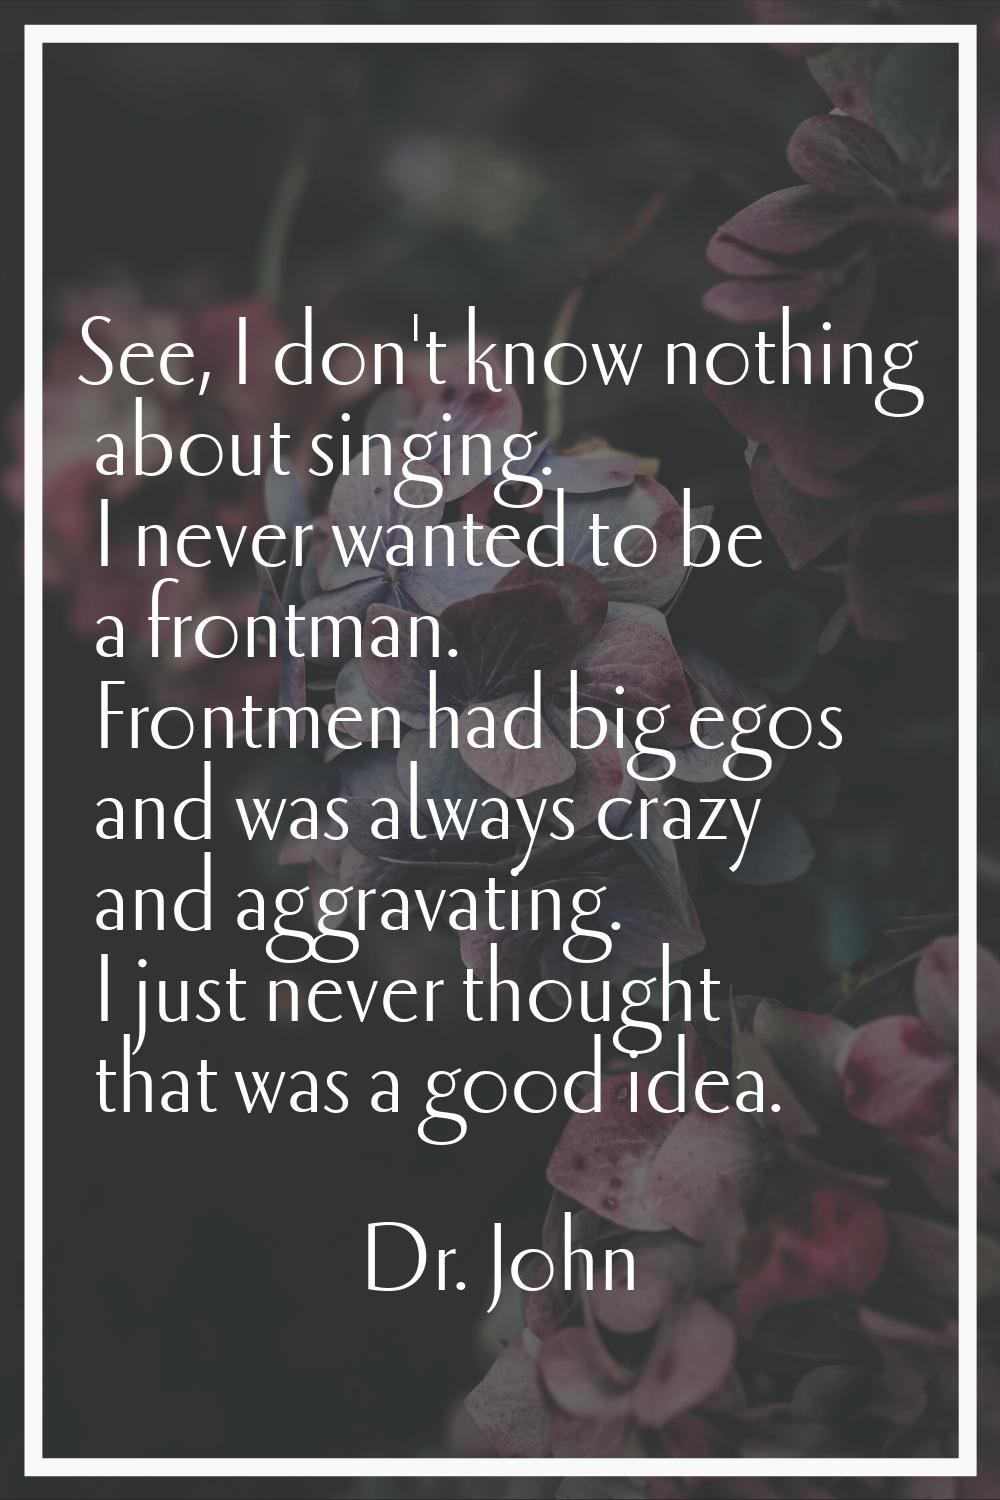 See, I don't know nothing about singing. I never wanted to be a frontman. Frontmen had big egos and